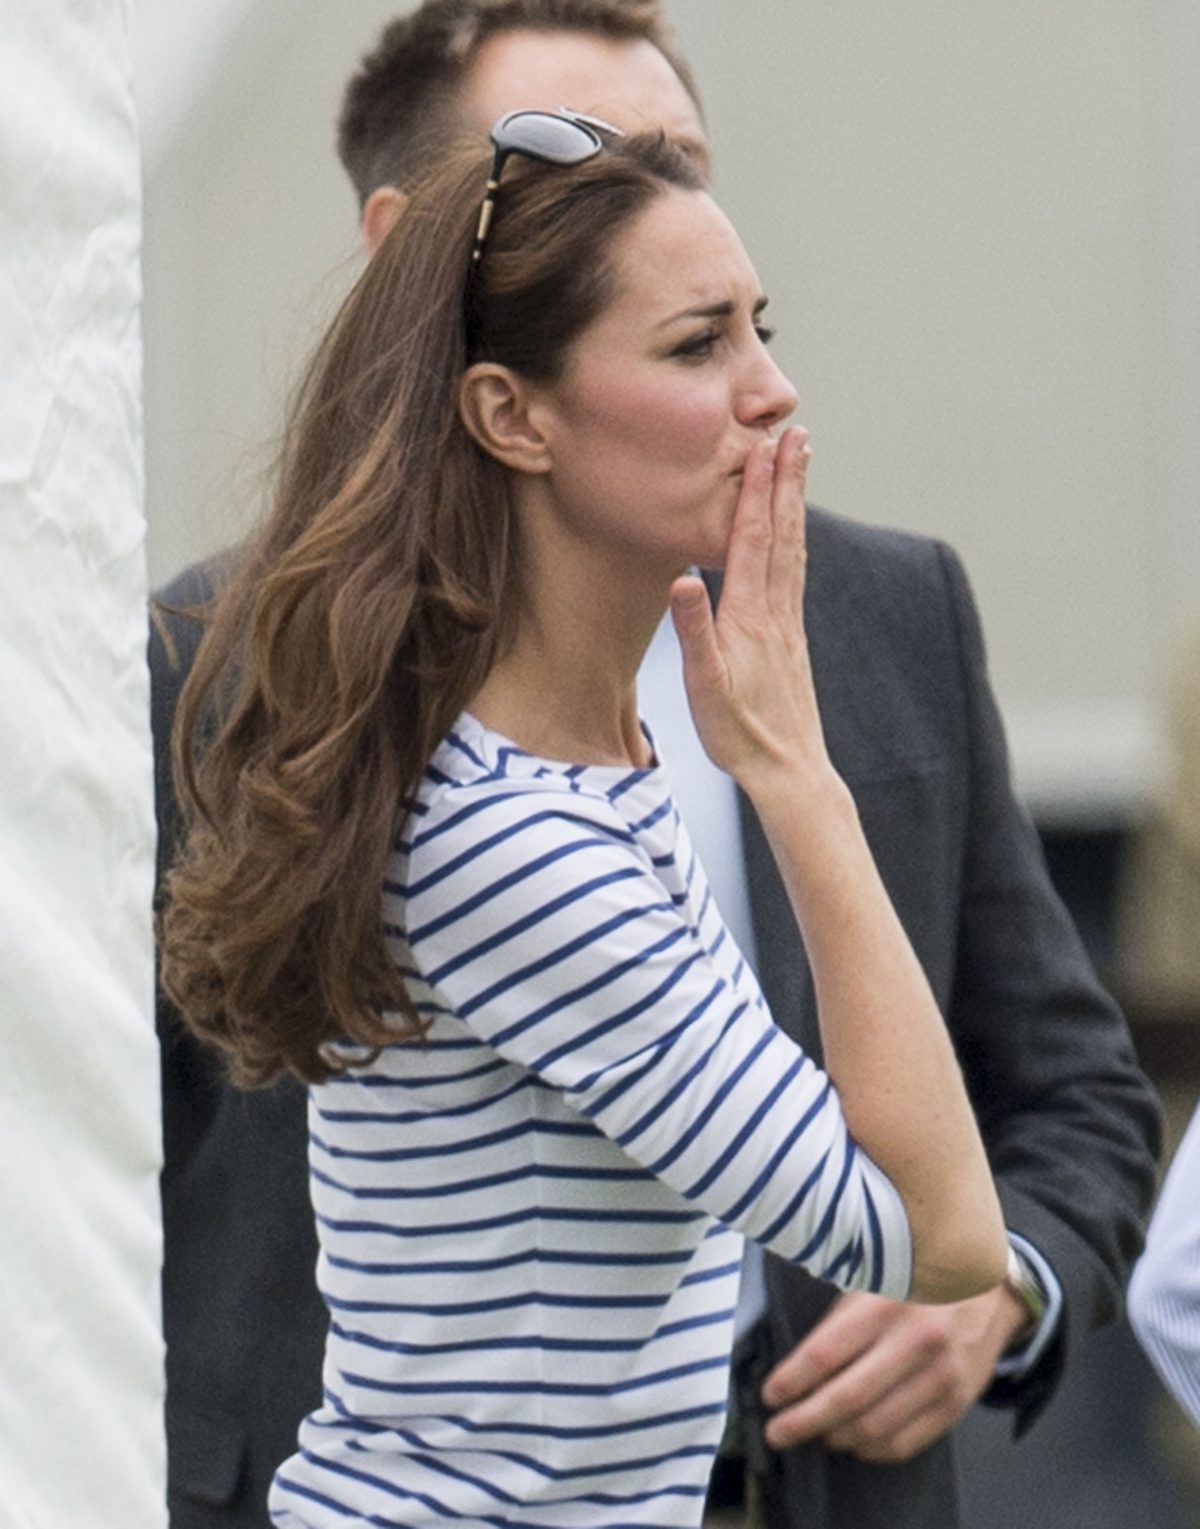 Kate Middleton blows a kiss to Prince William as he plays a match at Cirencester Park Polo Club